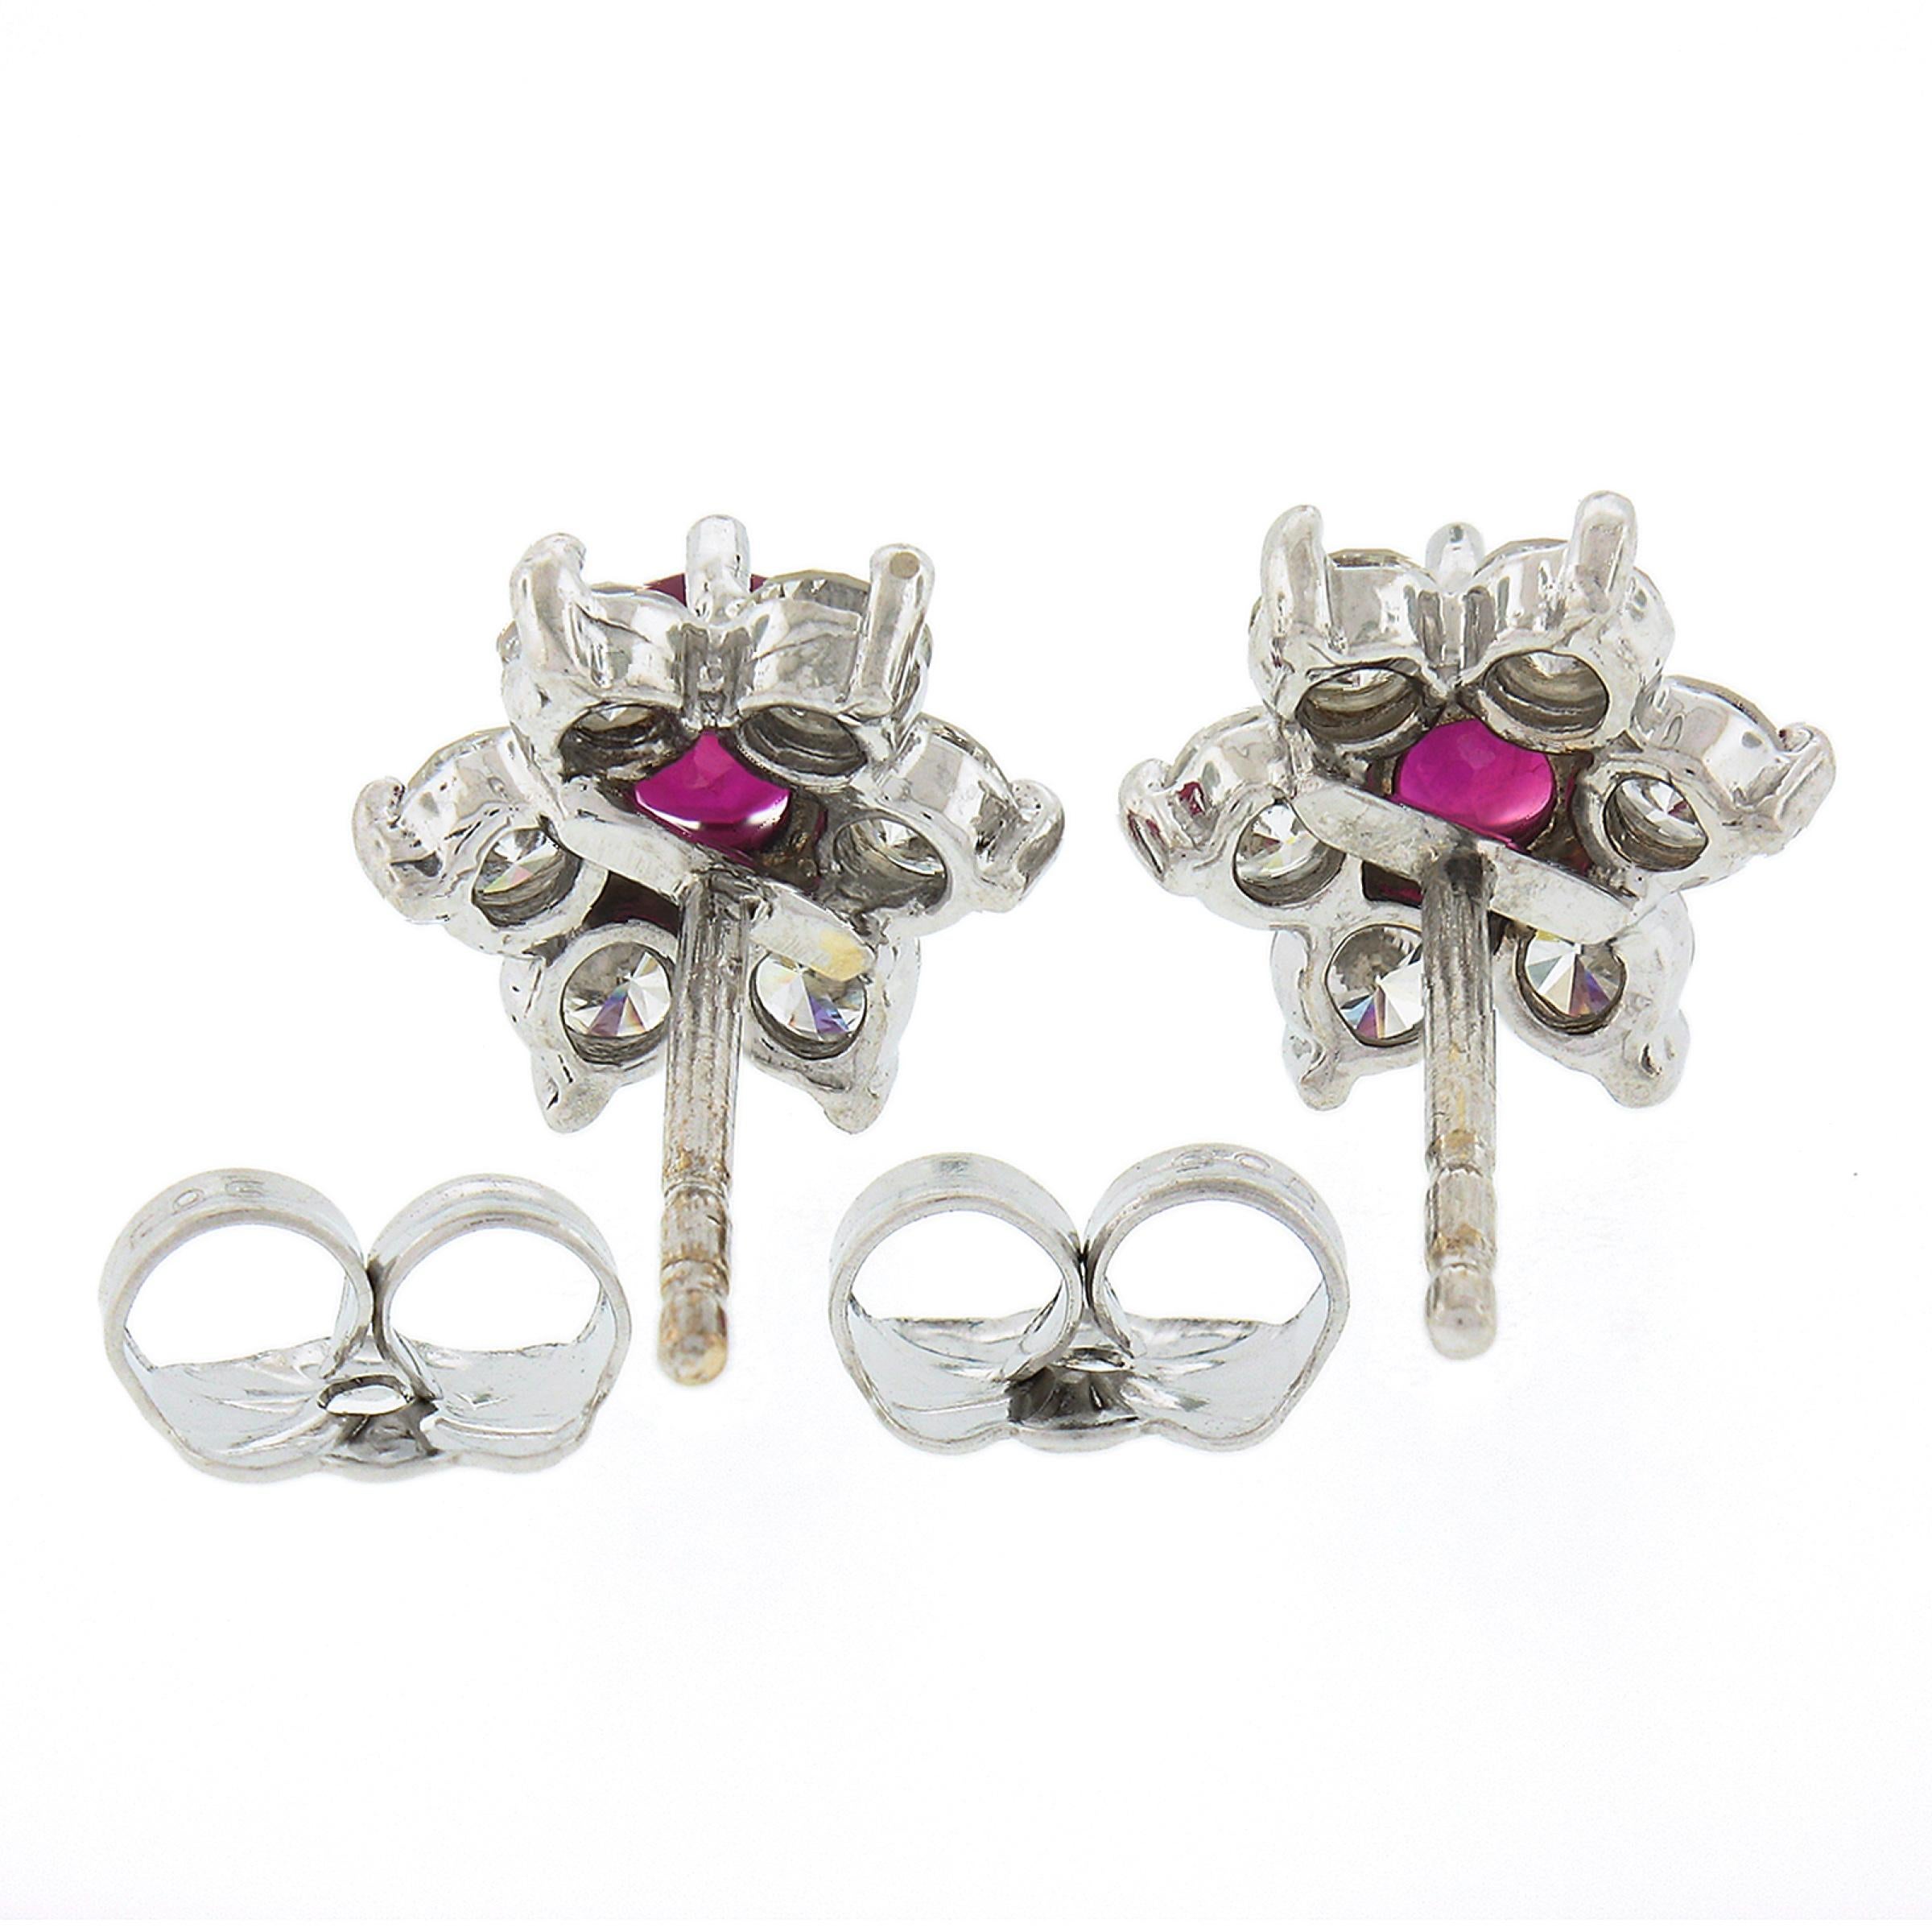 This is an absolutely gorgeous petite pair of ruby and diamond flower cluster earrings that is very well crafted in solid 14k white gold. Each earring features a fine round brilliant ruby neatly set at its center showing the most stunning vivid